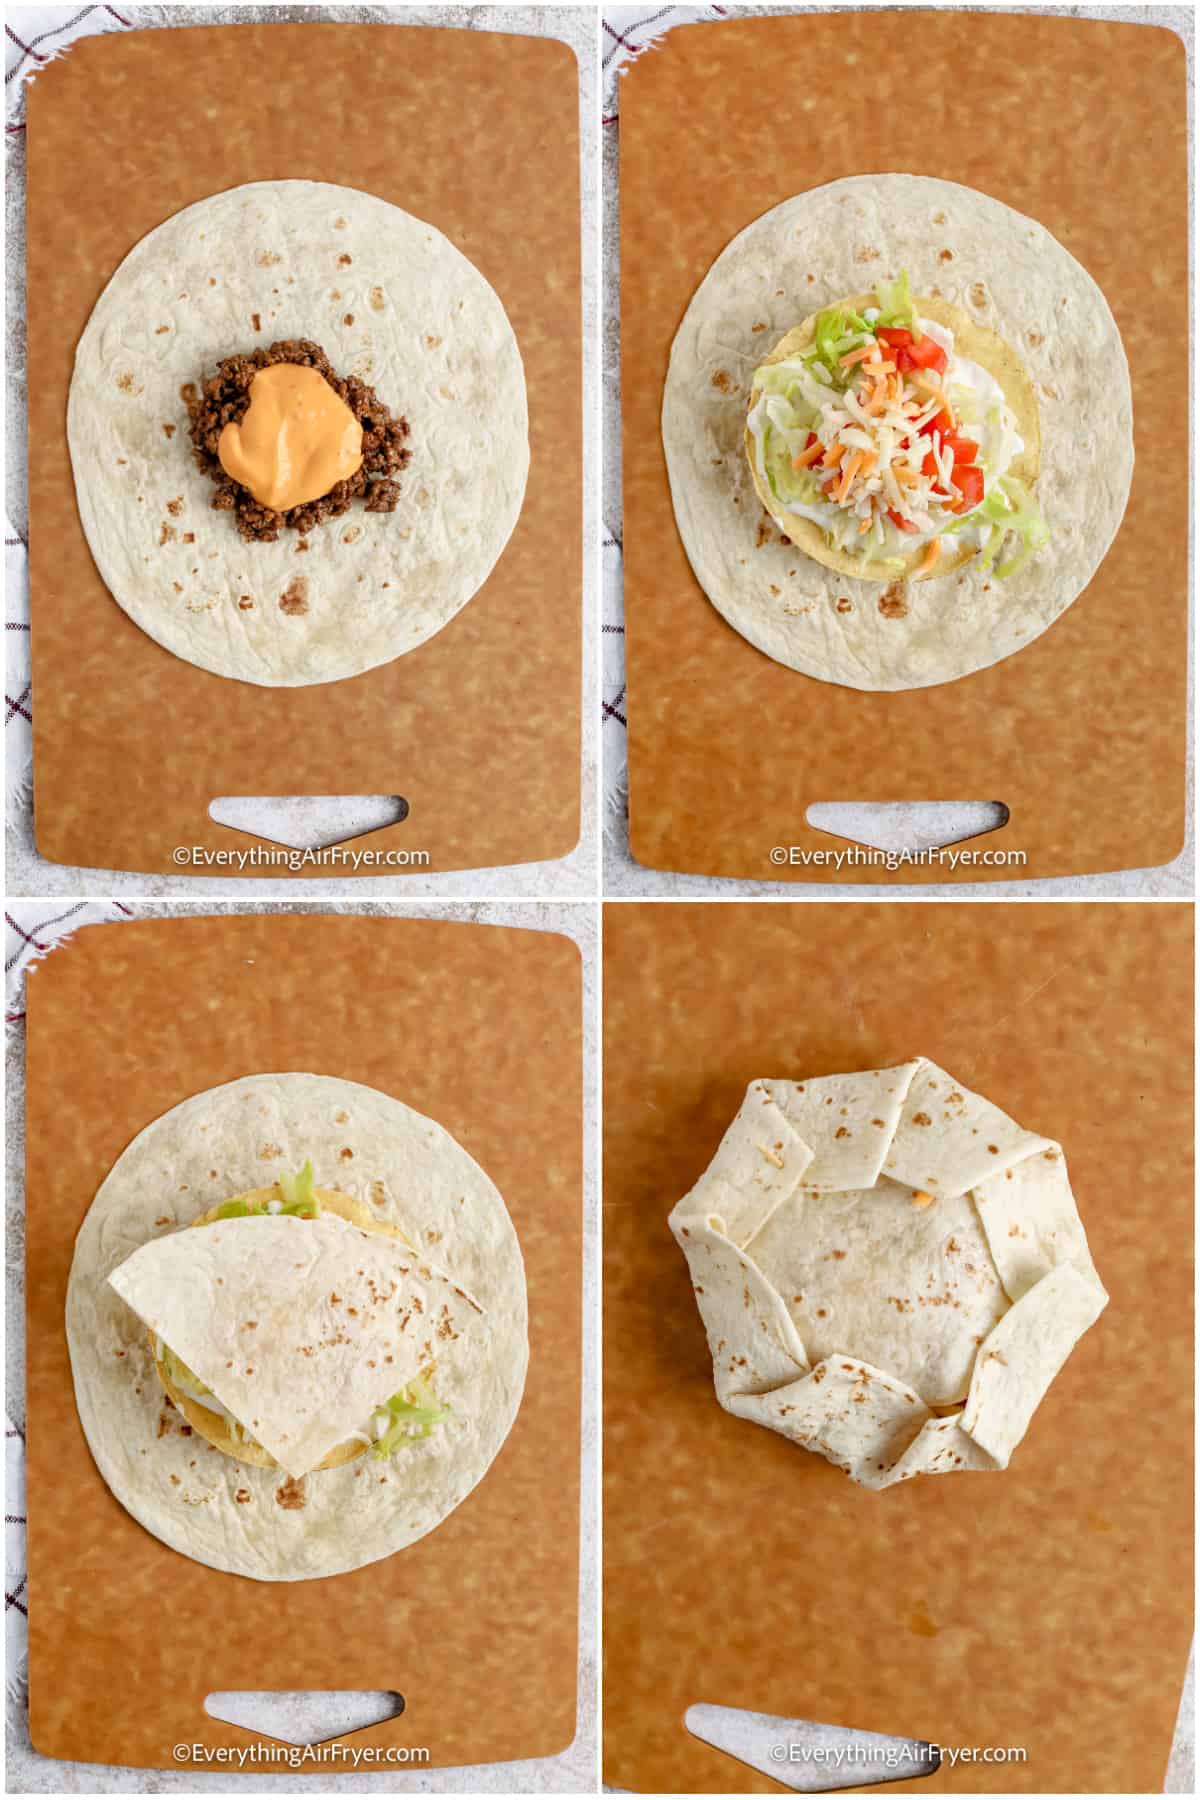 Four images to show the steps to create a crunchwrap supreme.